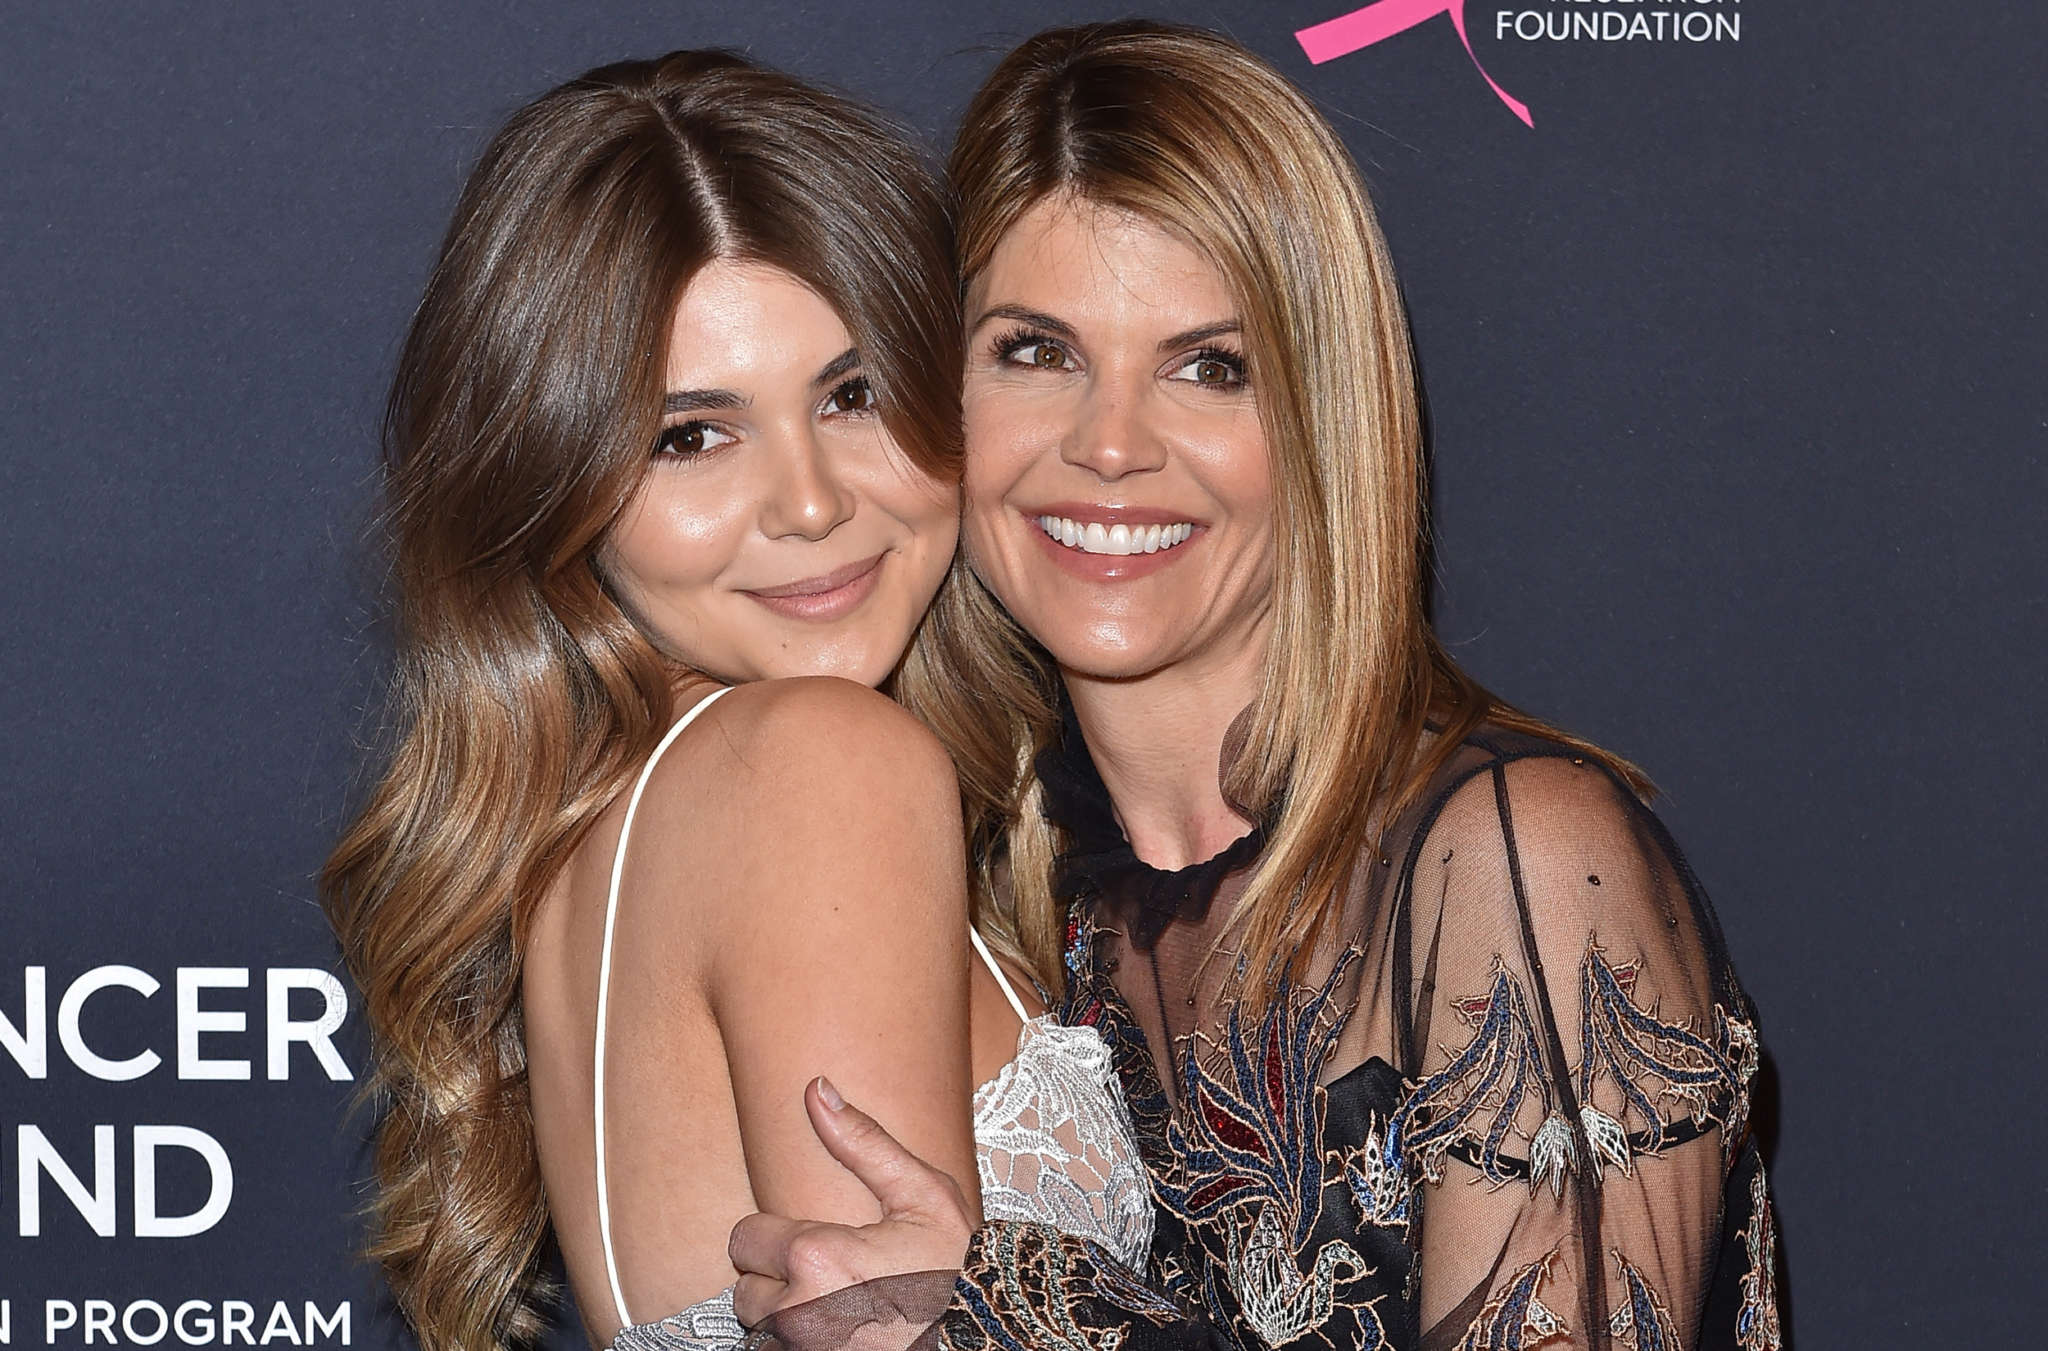 ”olivia-jade-is-worried-about-her-future-while-mom-lori-loughlin-and-her-dad-mossimo-giannulli-face-jail-time”